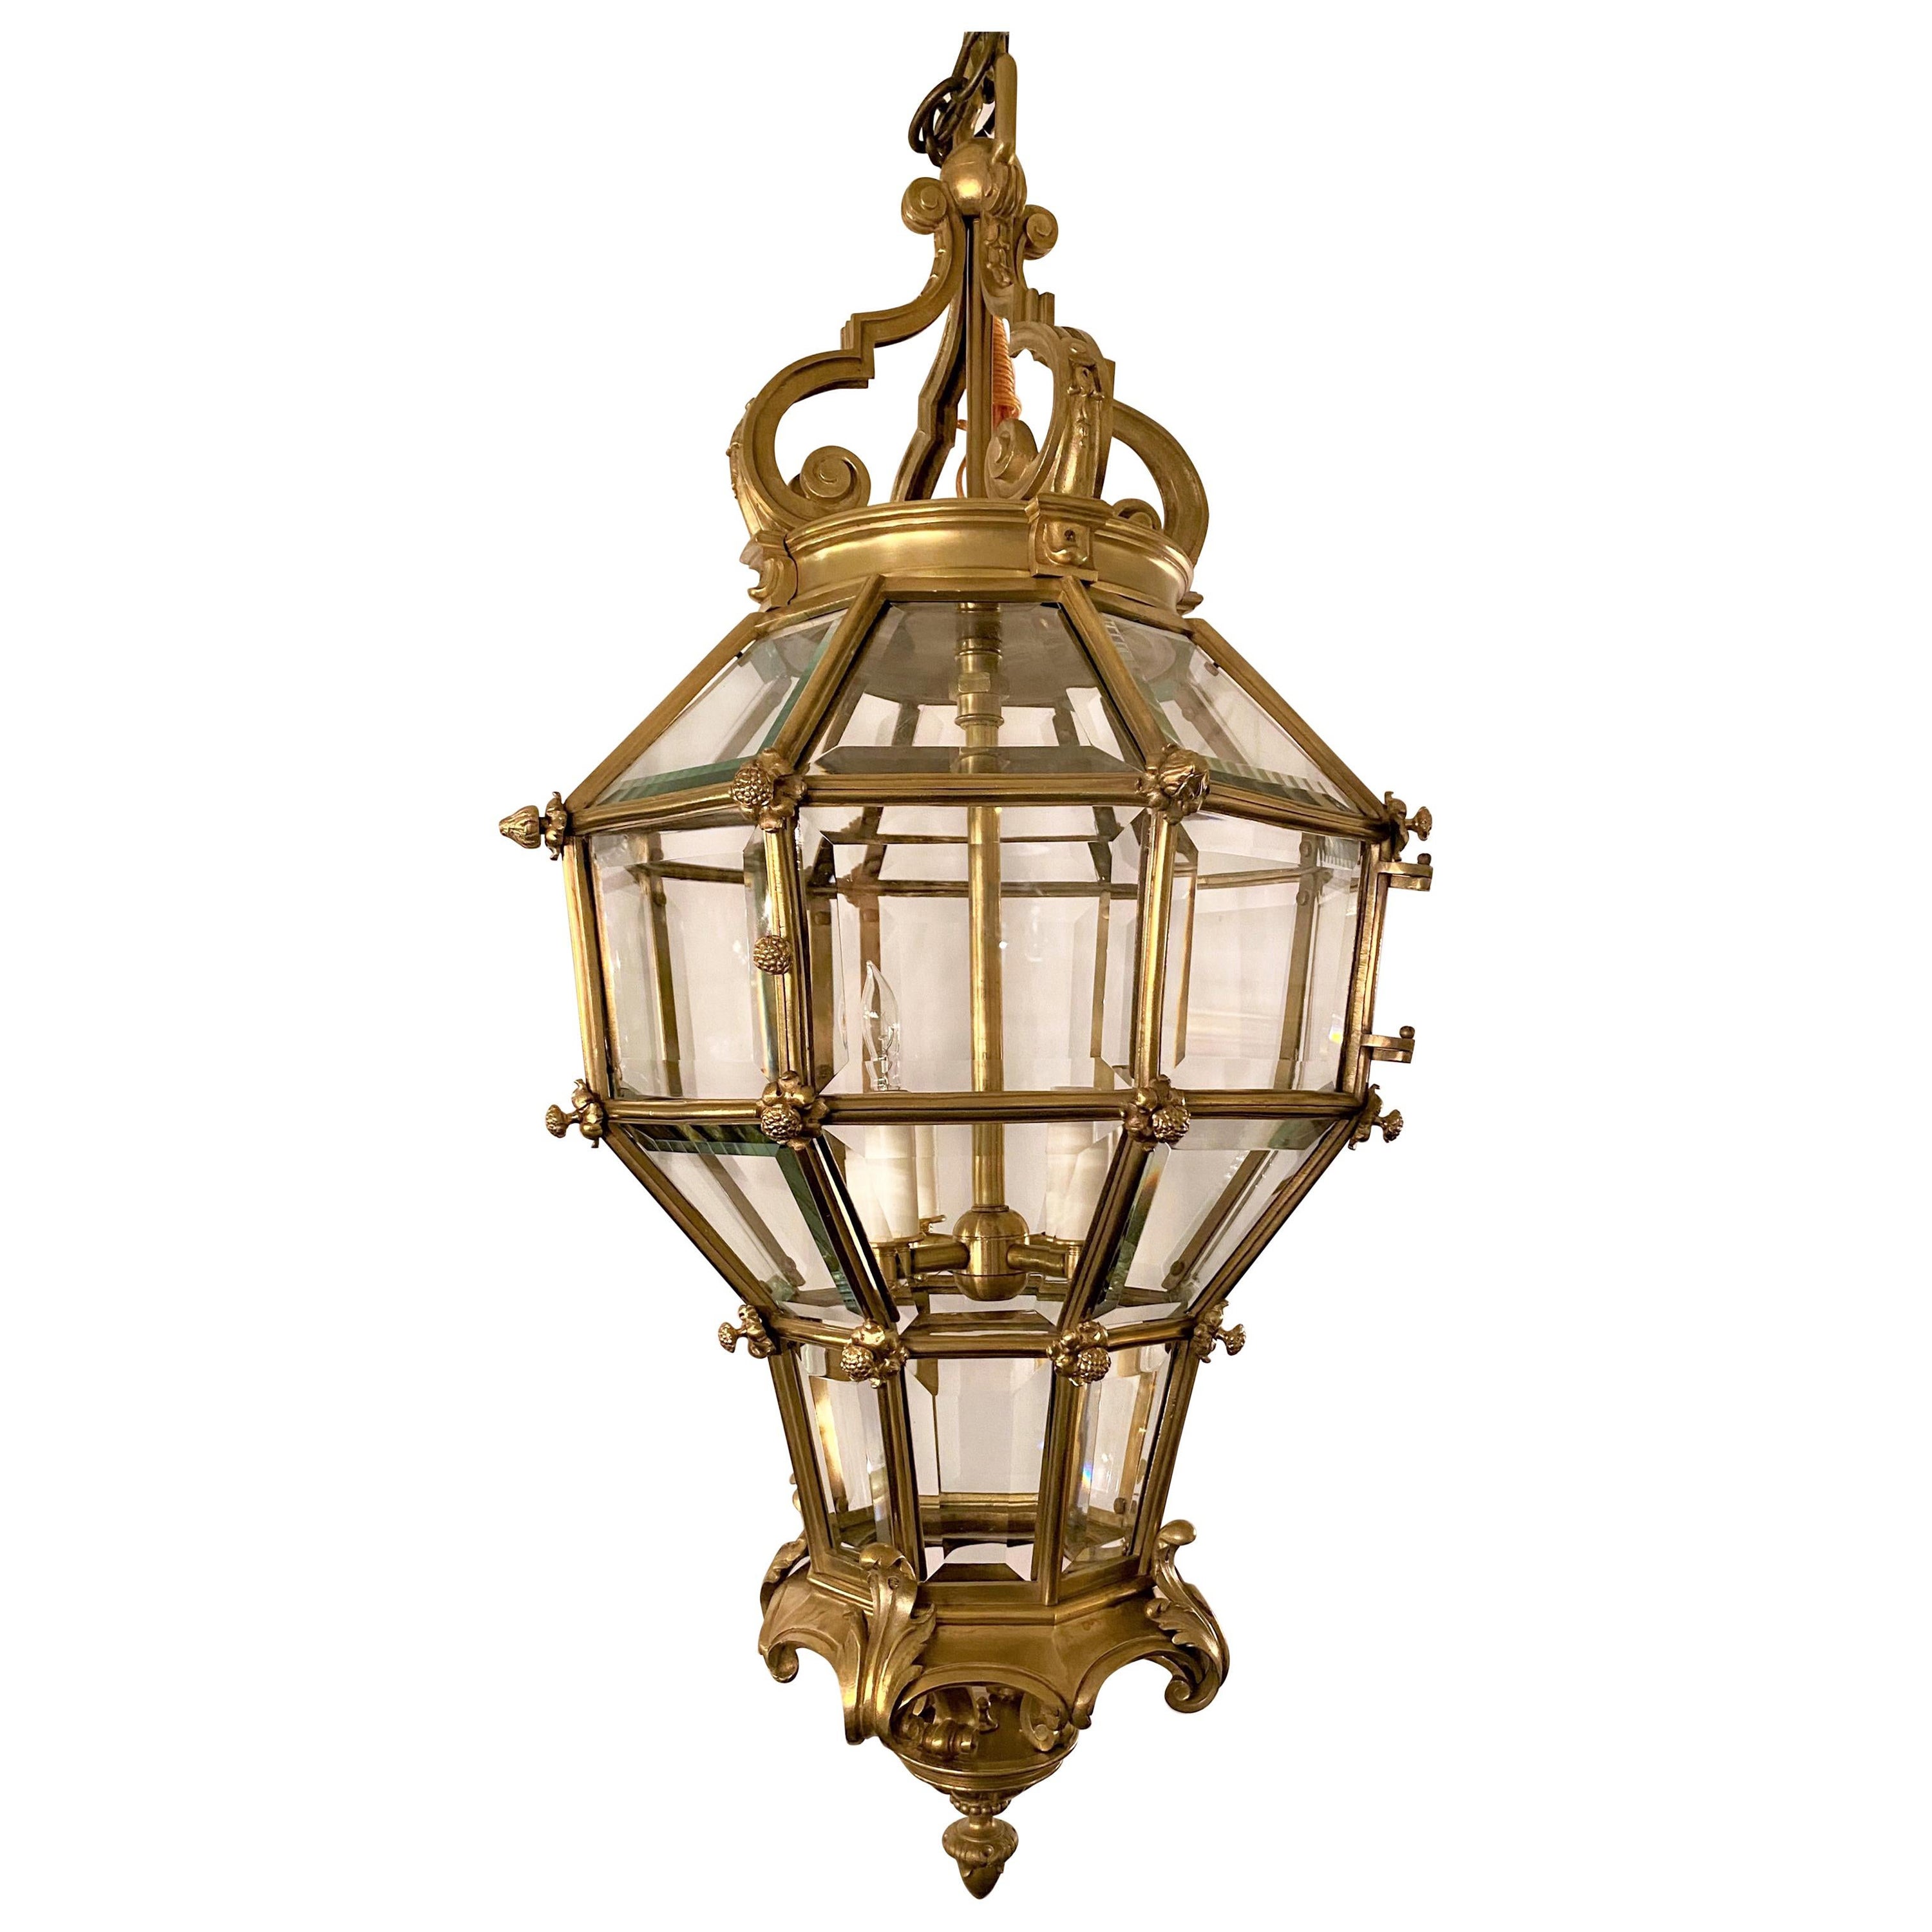 Antique 19th Century French Gold Bronze and Beveled Glass Chateau Lantern For Sale